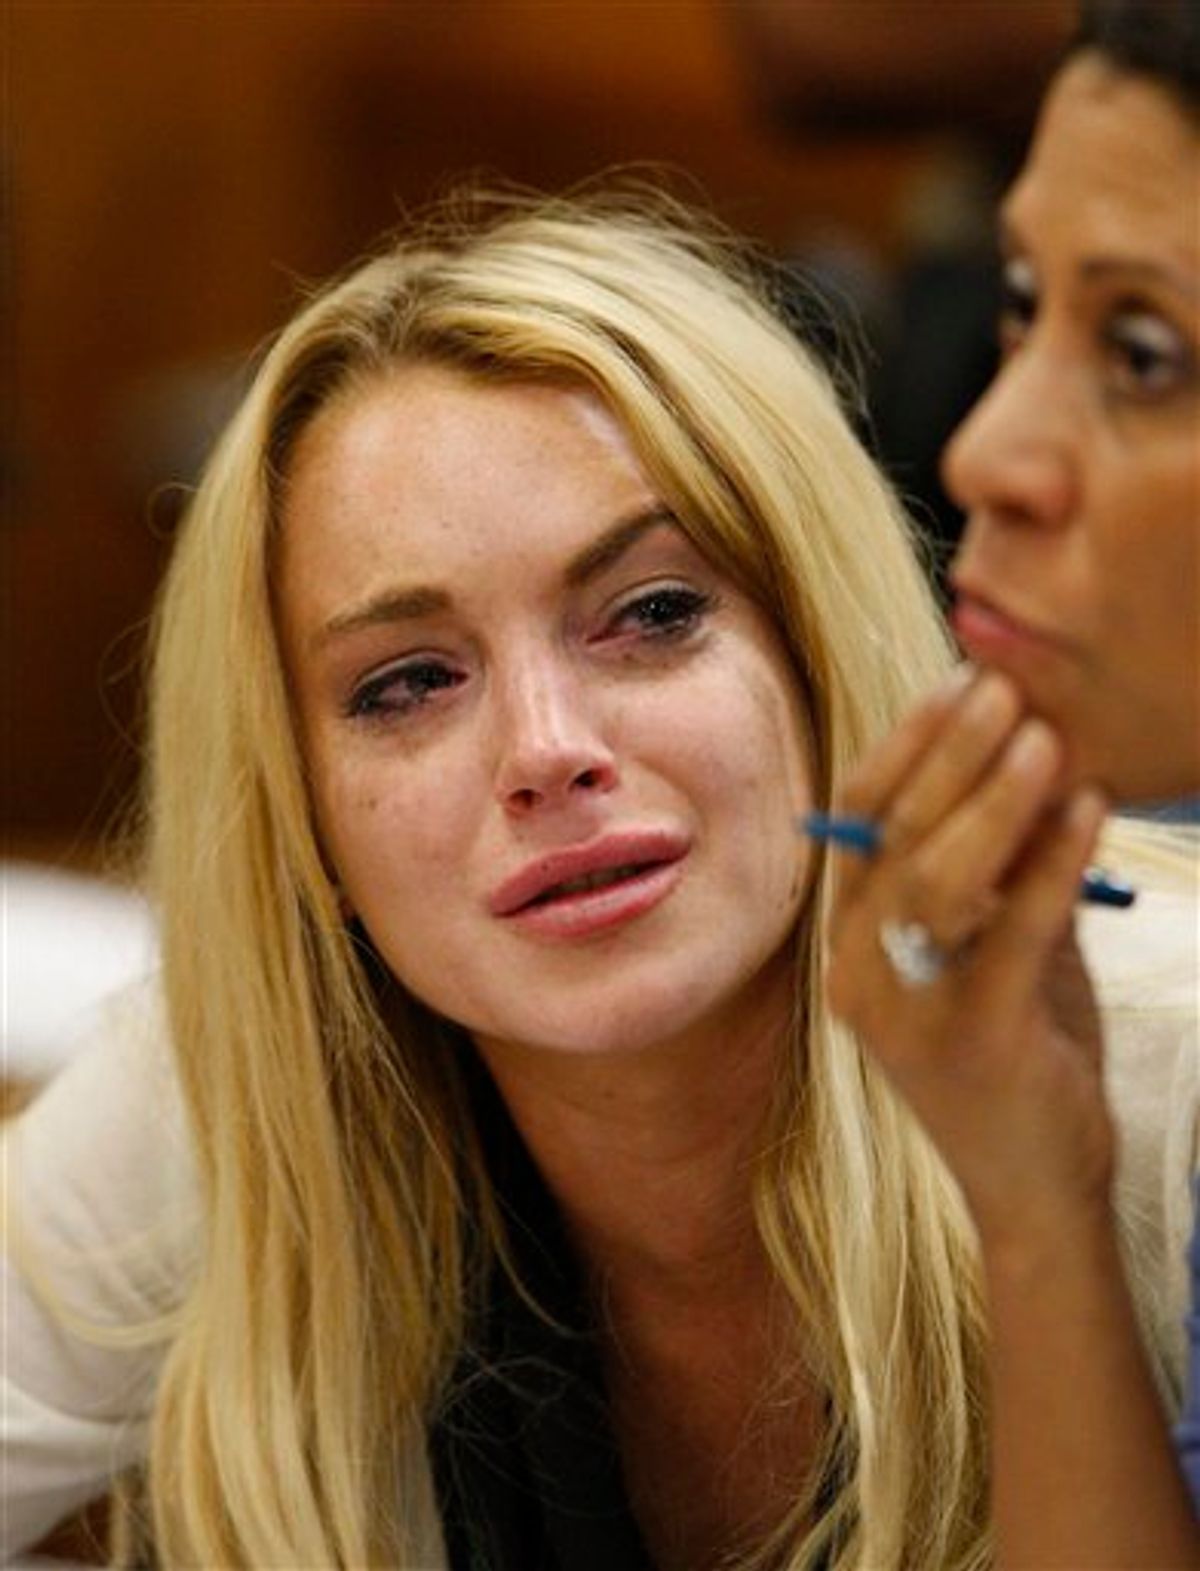 Actress Lindsay Lohan, left, reacts with her attorney Shawn Chapman Holley after the sentencing by Superior Court Judge Marsha Reve during a hearing in Beverly Hills, Calif., Tuesday, July 6, 2010. The judge sentenced Lindsay Lohan to 90 days in jail Tuesday after ruling she violated probation in a 2007 drug case by failing to attend court-ordered alcohol education classes. (AP Photo/David McNew, Pool) (AP)